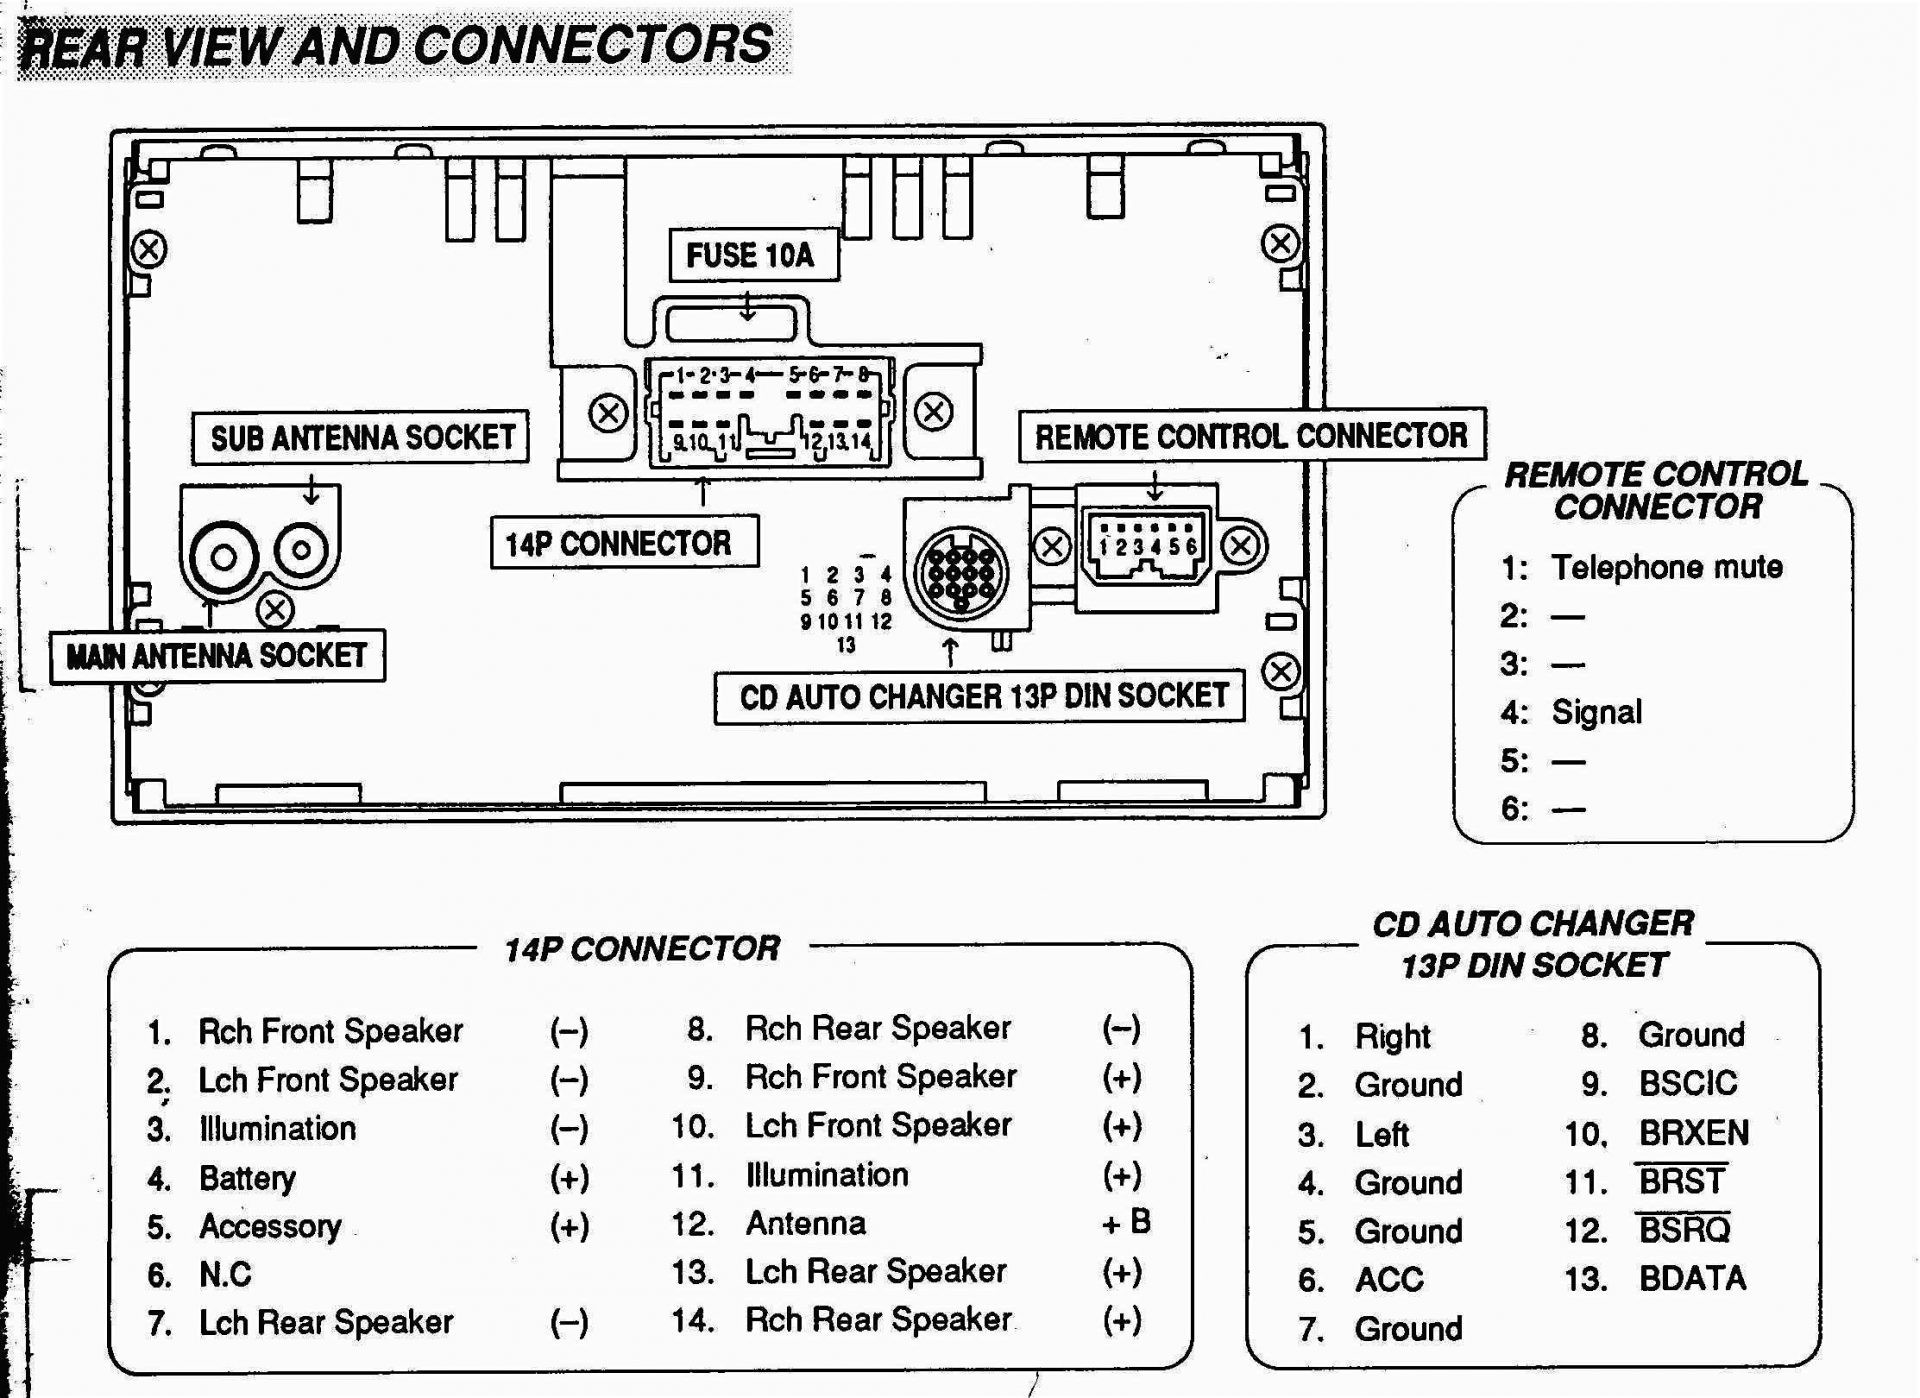 Car Stereo Wiring Diagram Awesome sony Car Cd Player Wiring Diagram Stereo Cdx Gt260mp Radio Pioneer